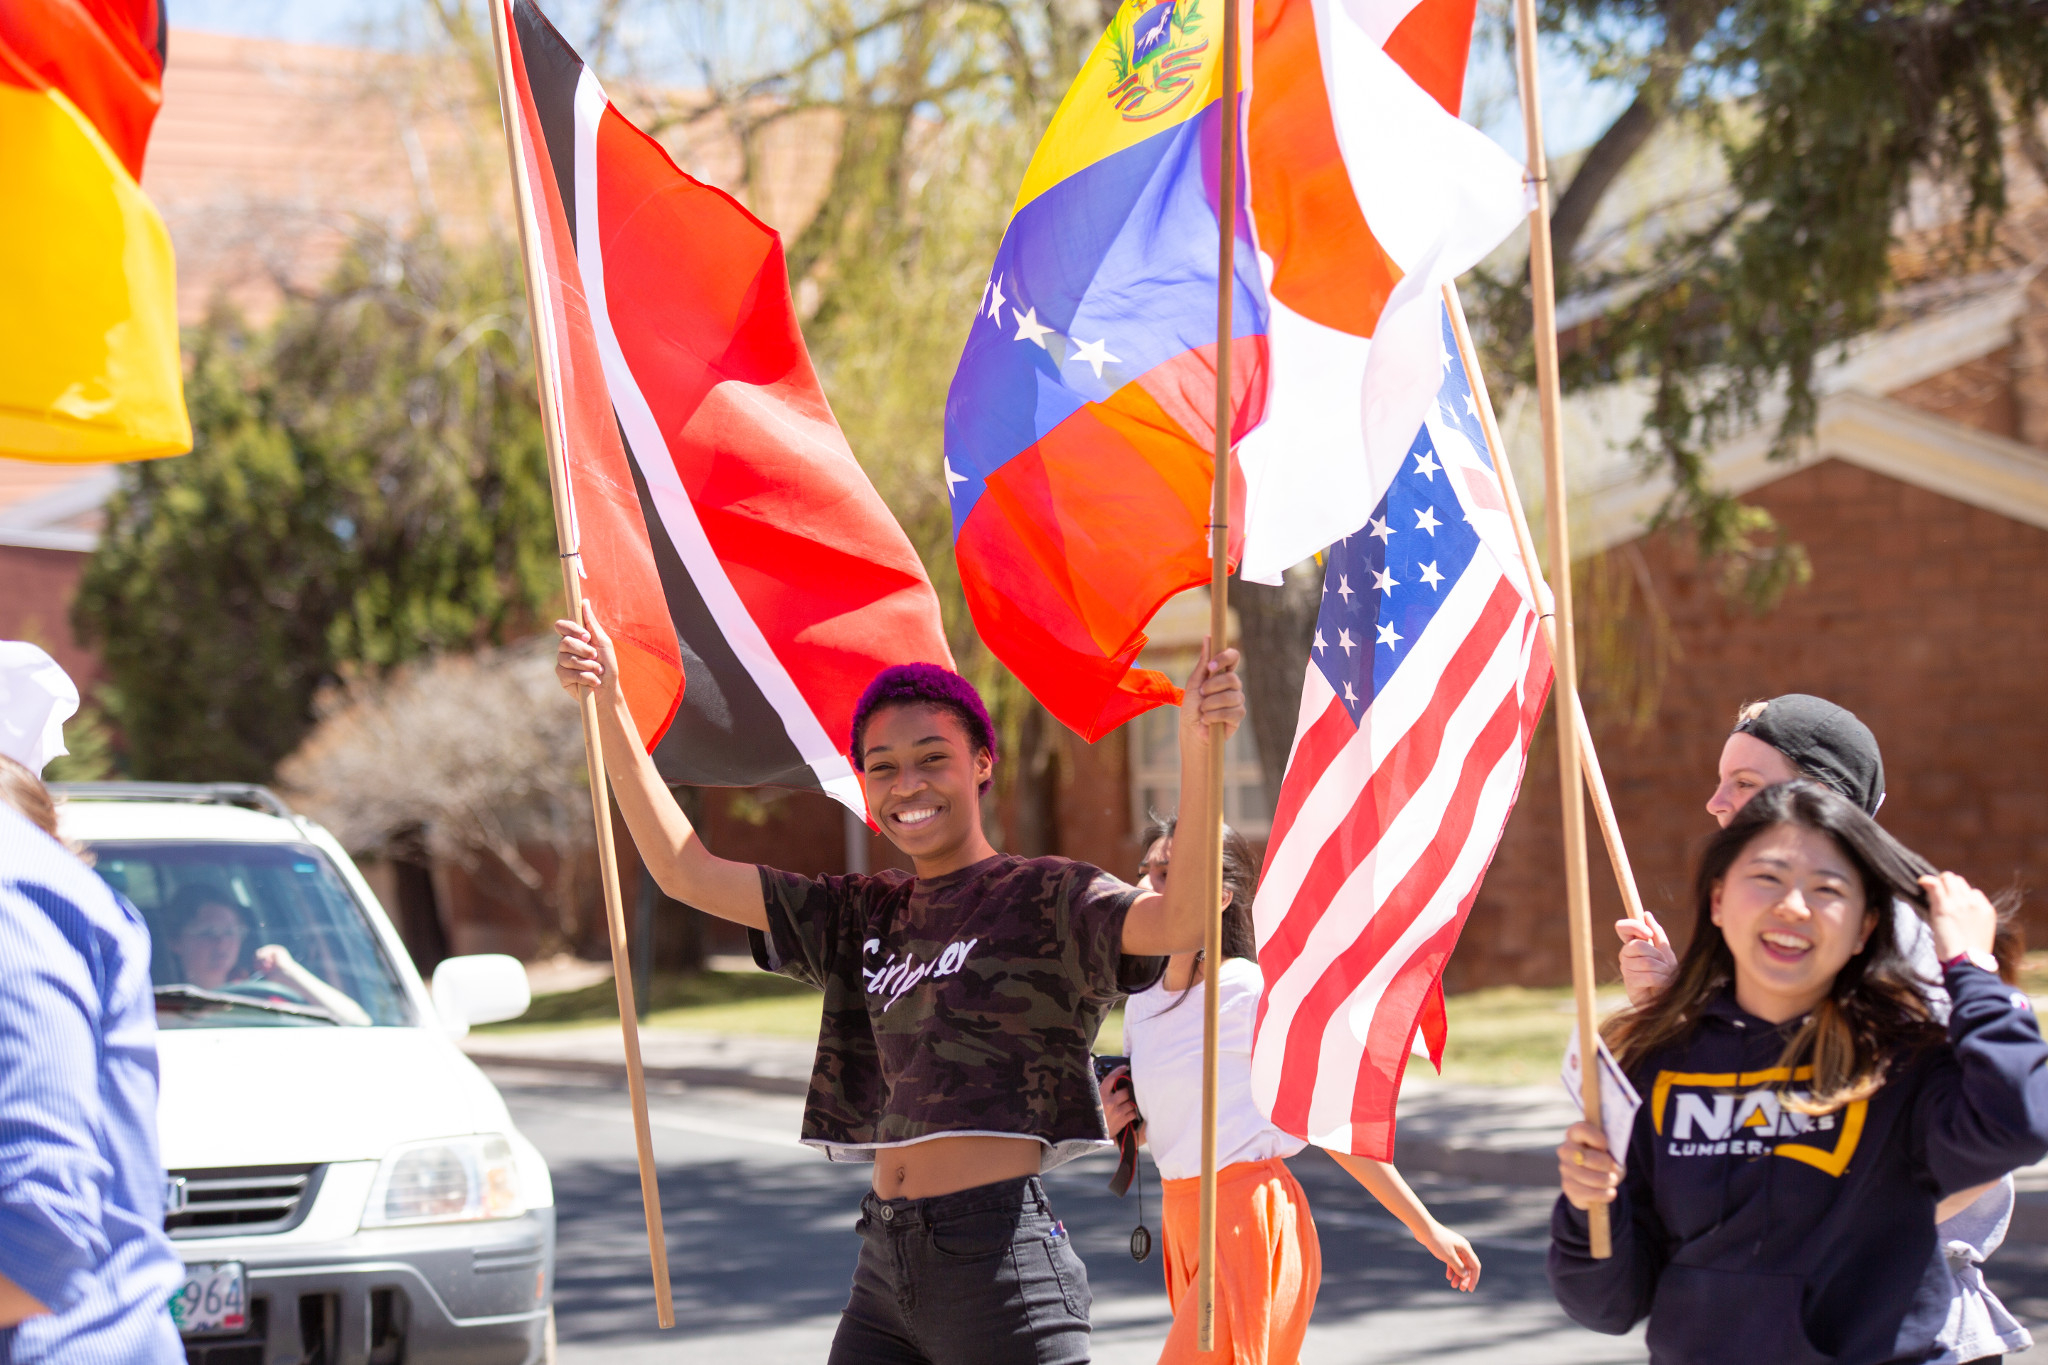 Student's smiling and marching with international flags.